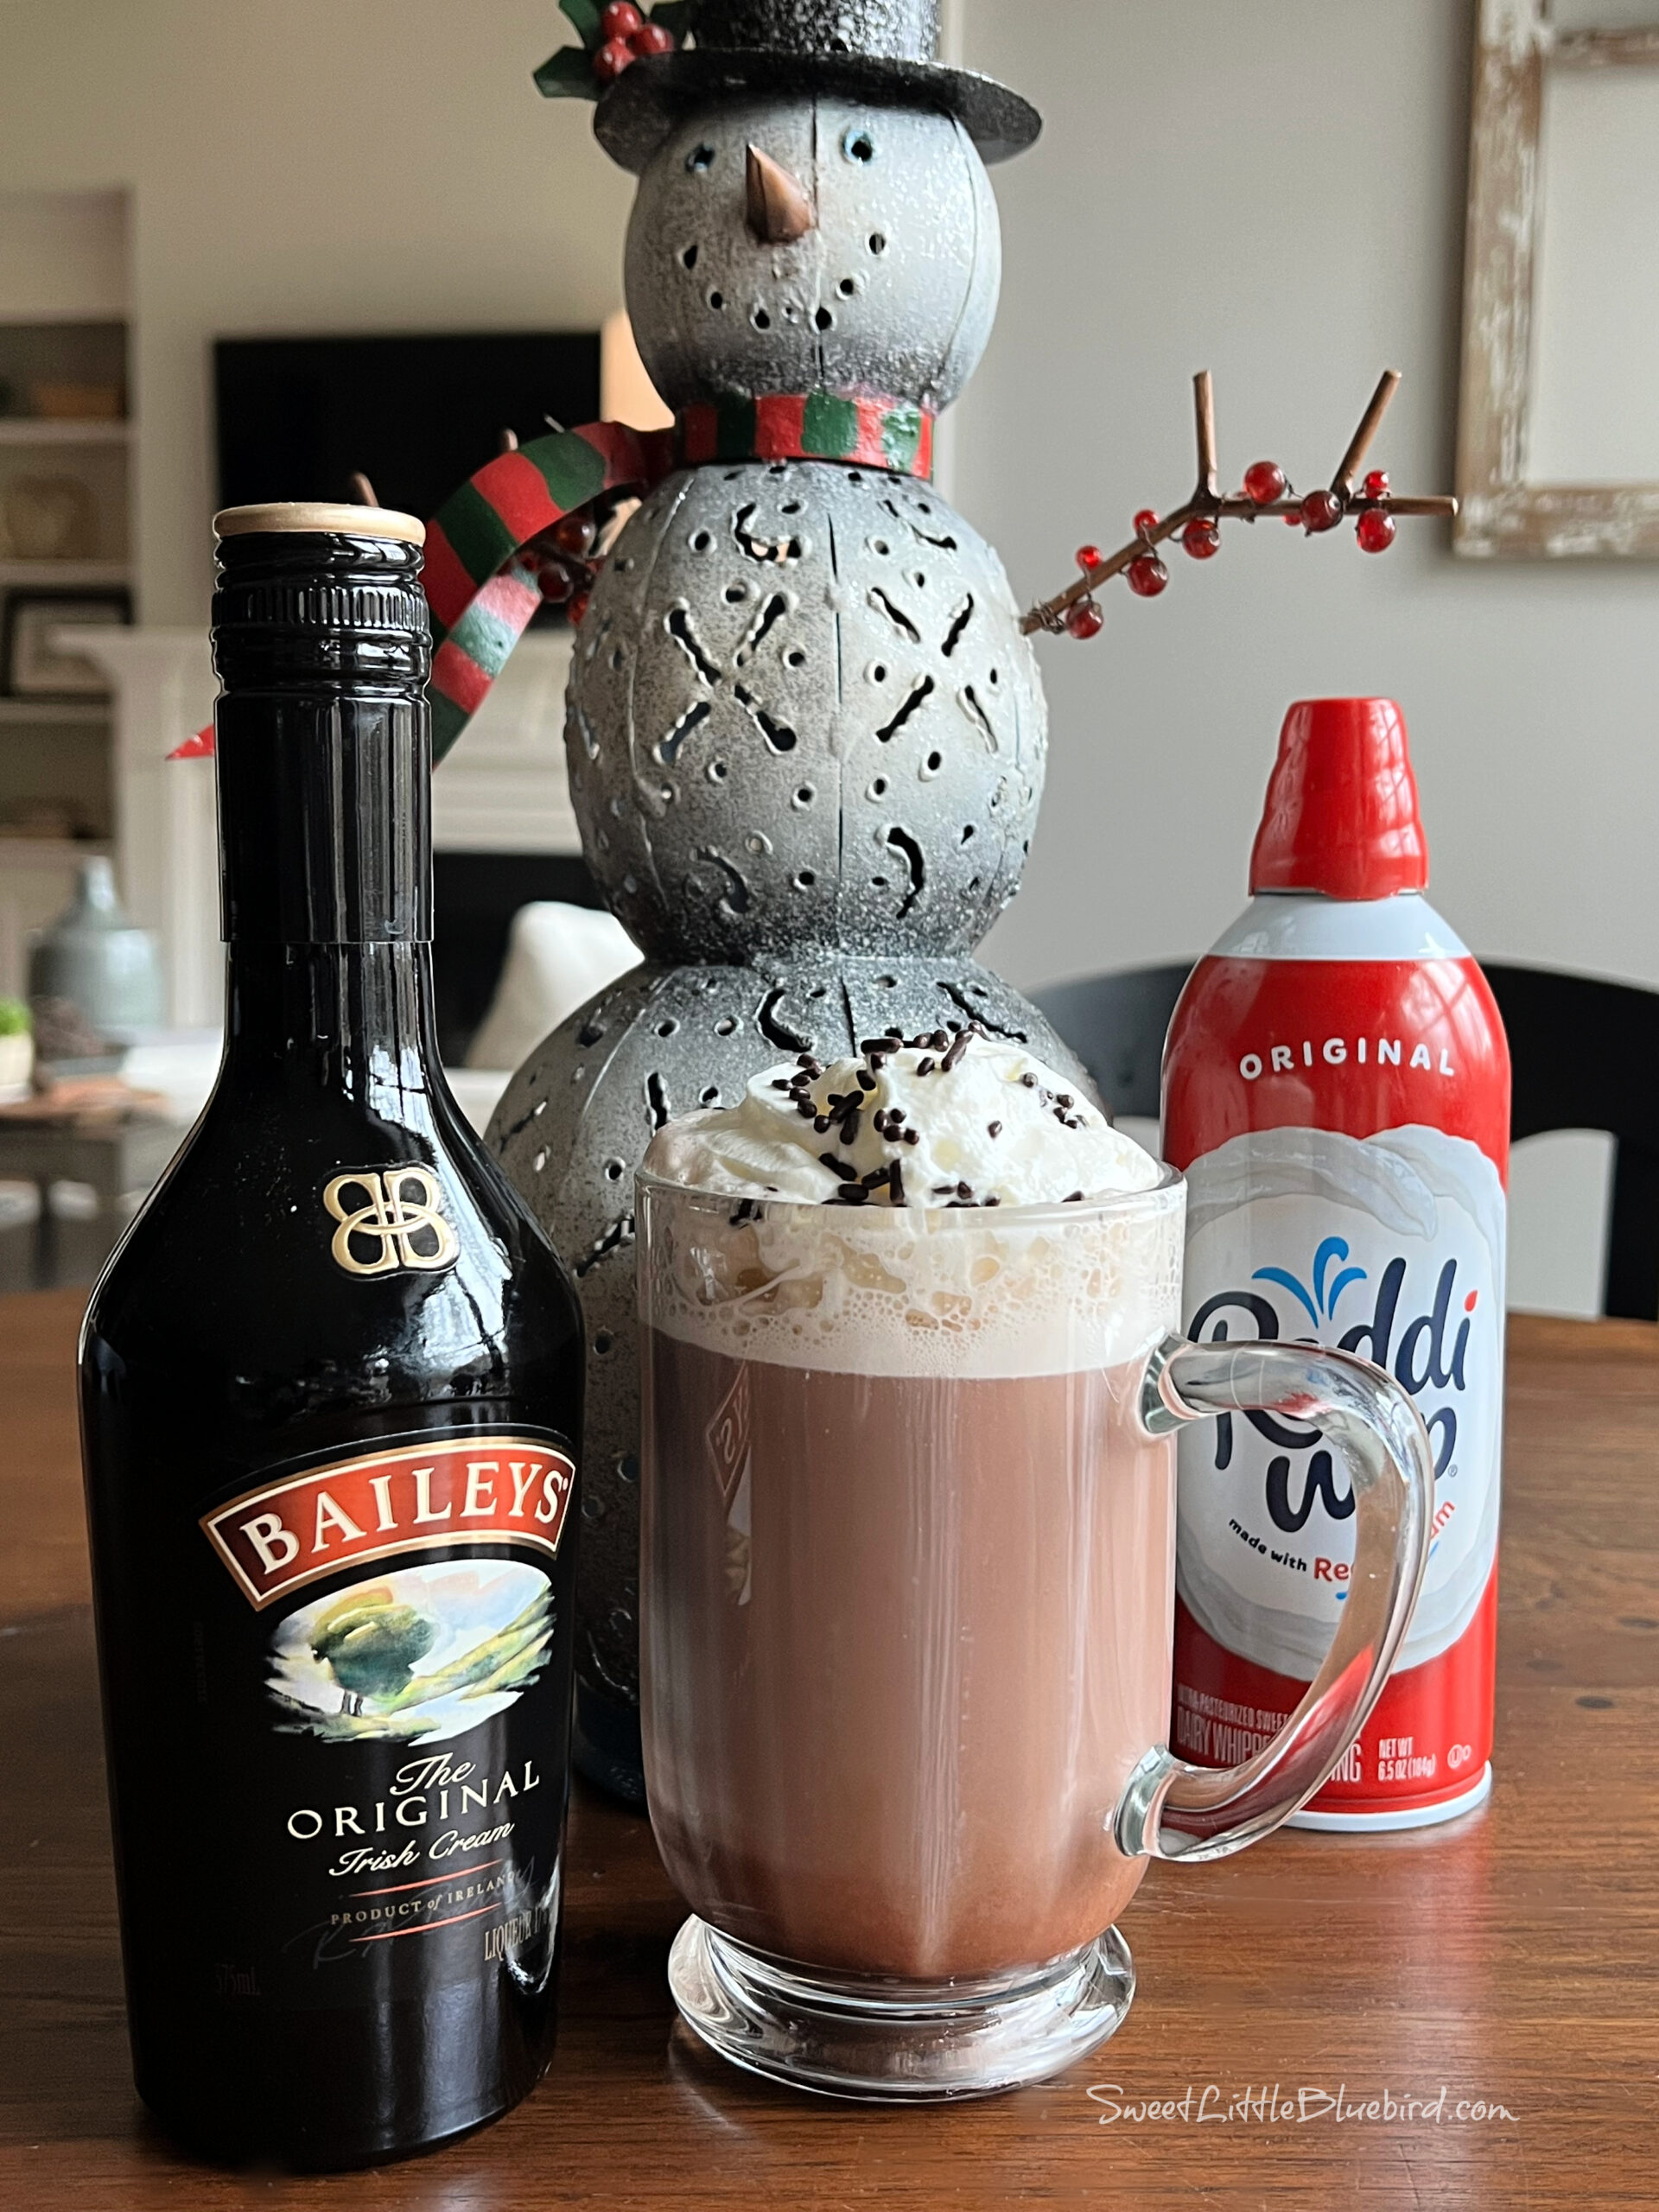 This photo shows a Dirty Snowman cocktail served in a clear mug glass, topped with whipped cream and chocolate sprinkles. Behind the mug is a decorative snowman figurine. Nest to the mug is a bottle of Baileys and a can of whipped cream.